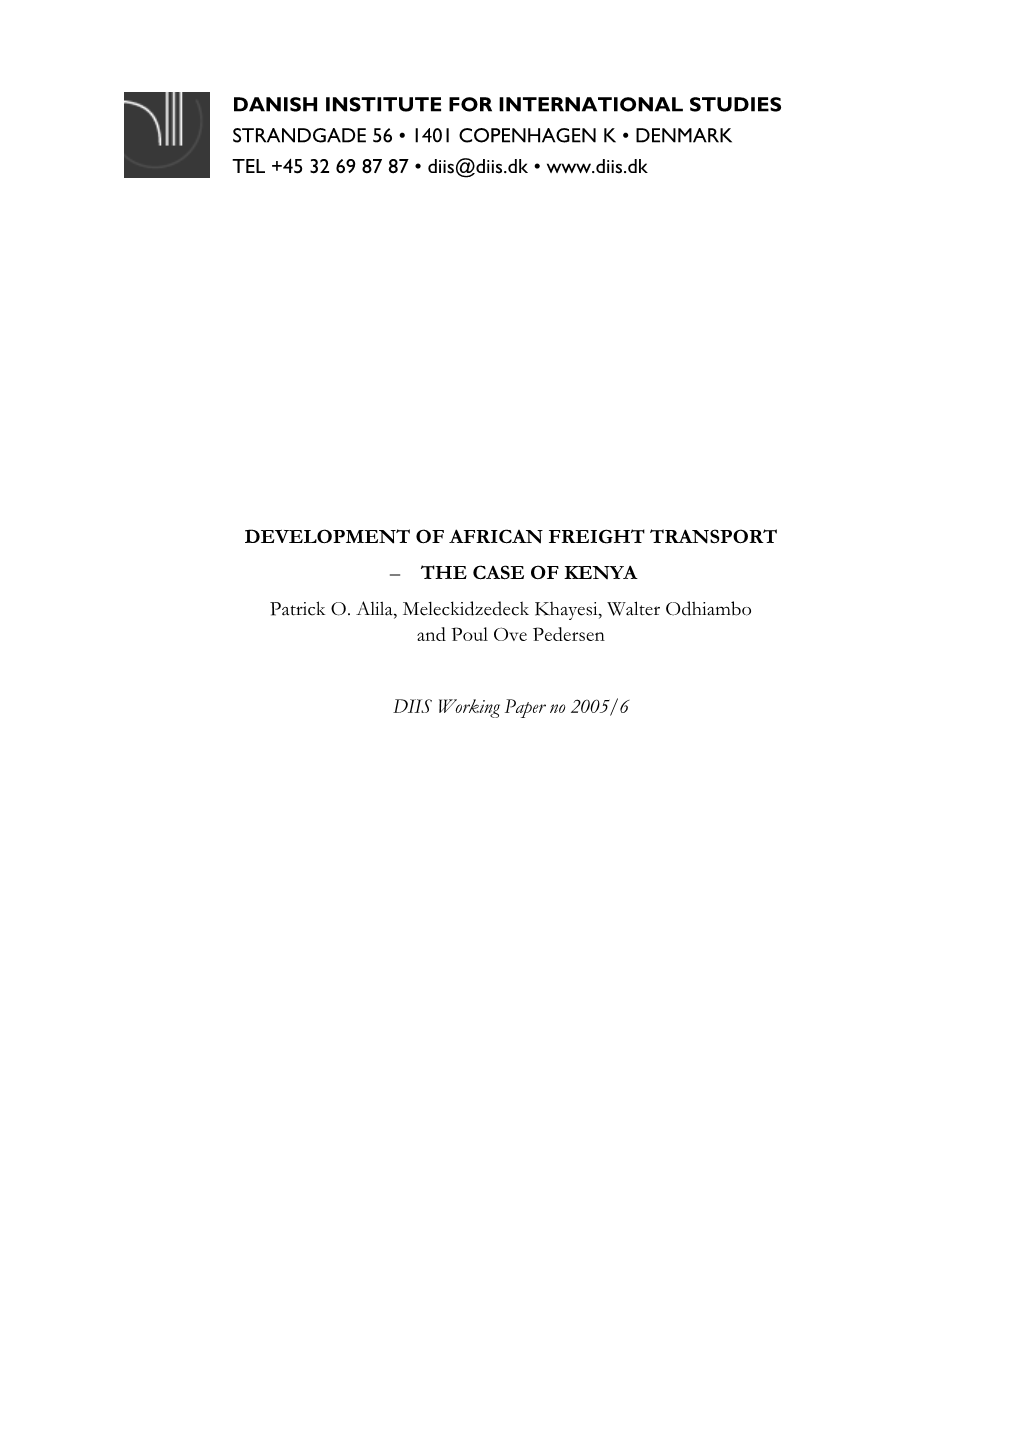 DEVELOPMENT of AFRICAN FREIGHT TRANSPORT – the CASE of KENYA Patrick O